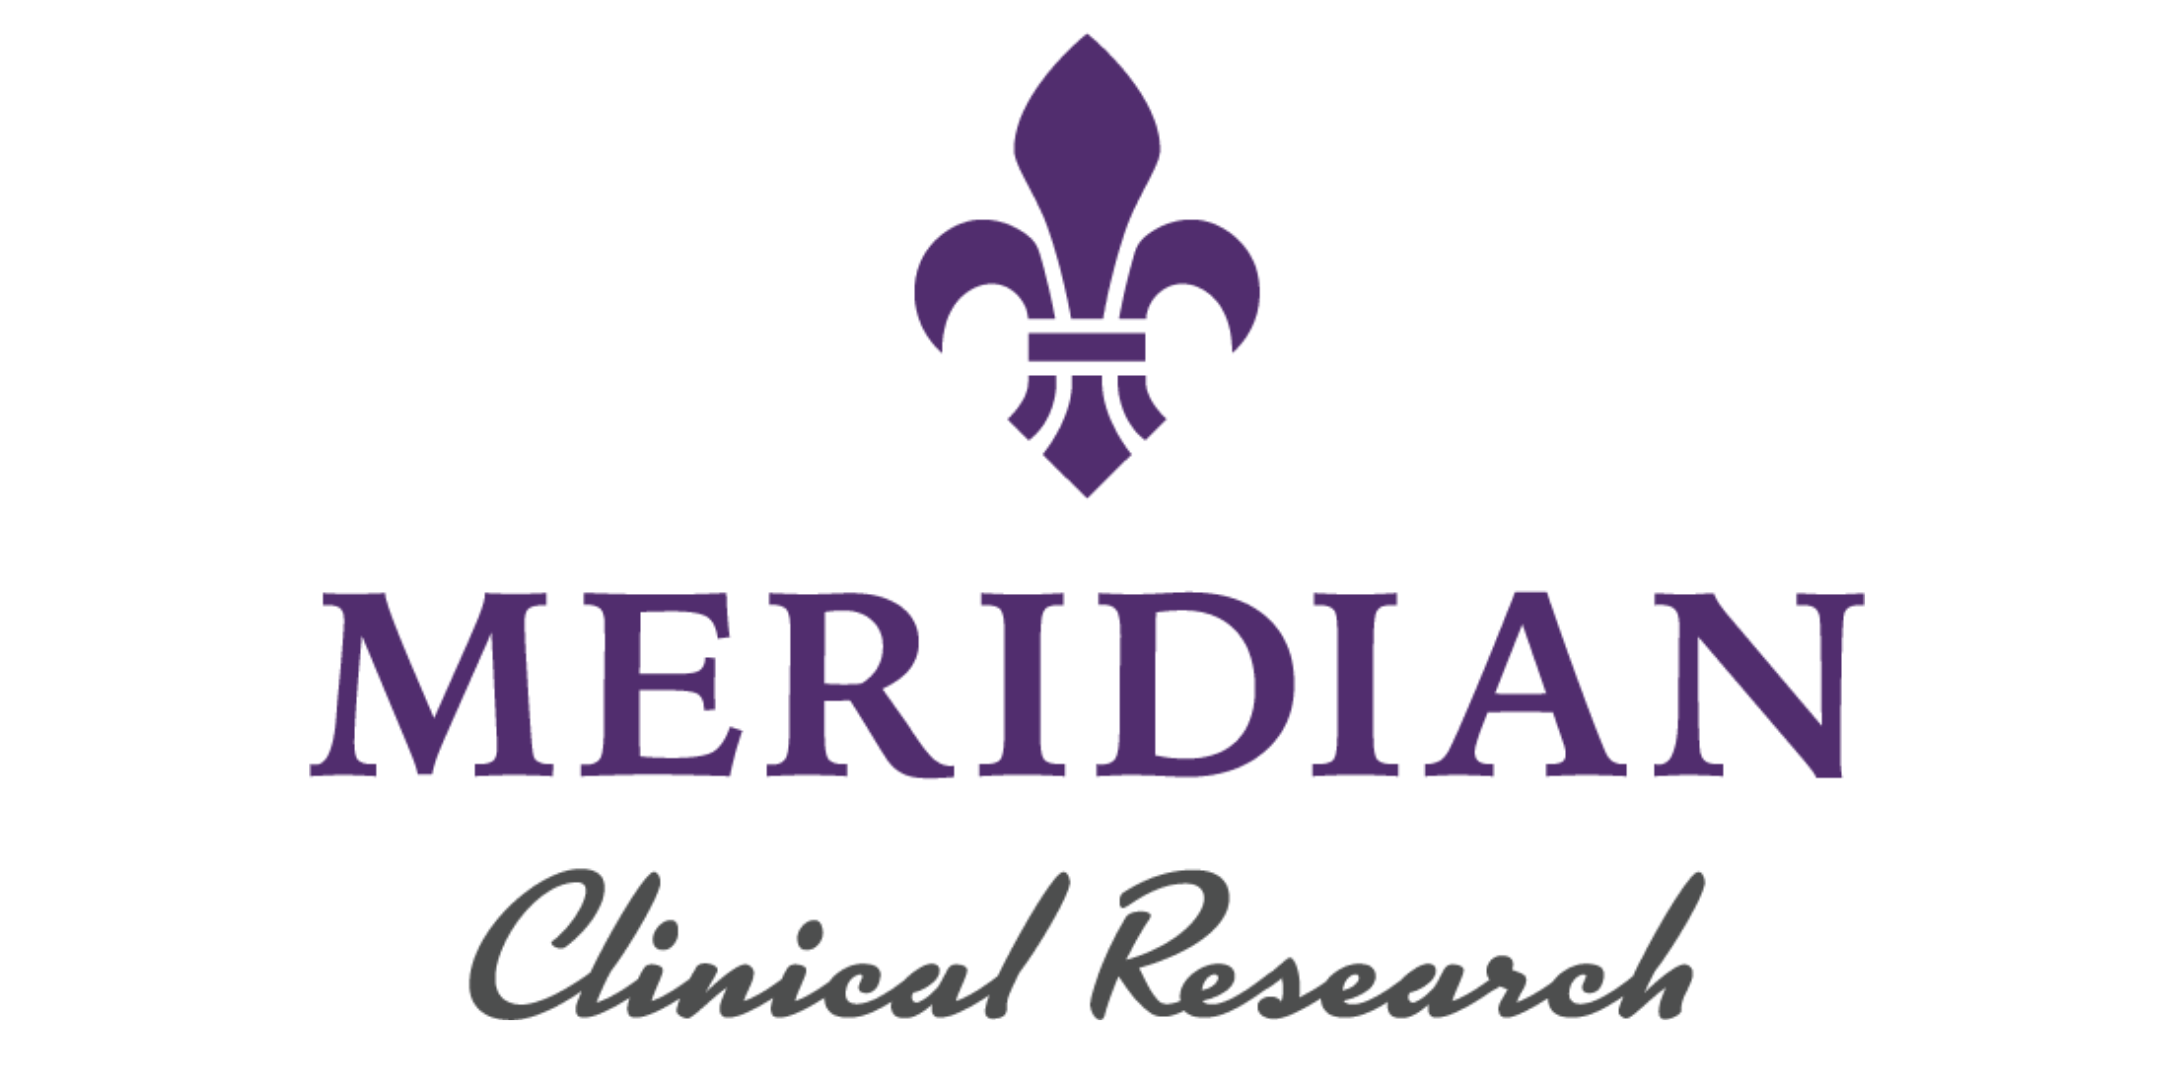 Meridian Clinical Research Opens Pediatric Site in Charleston, SC